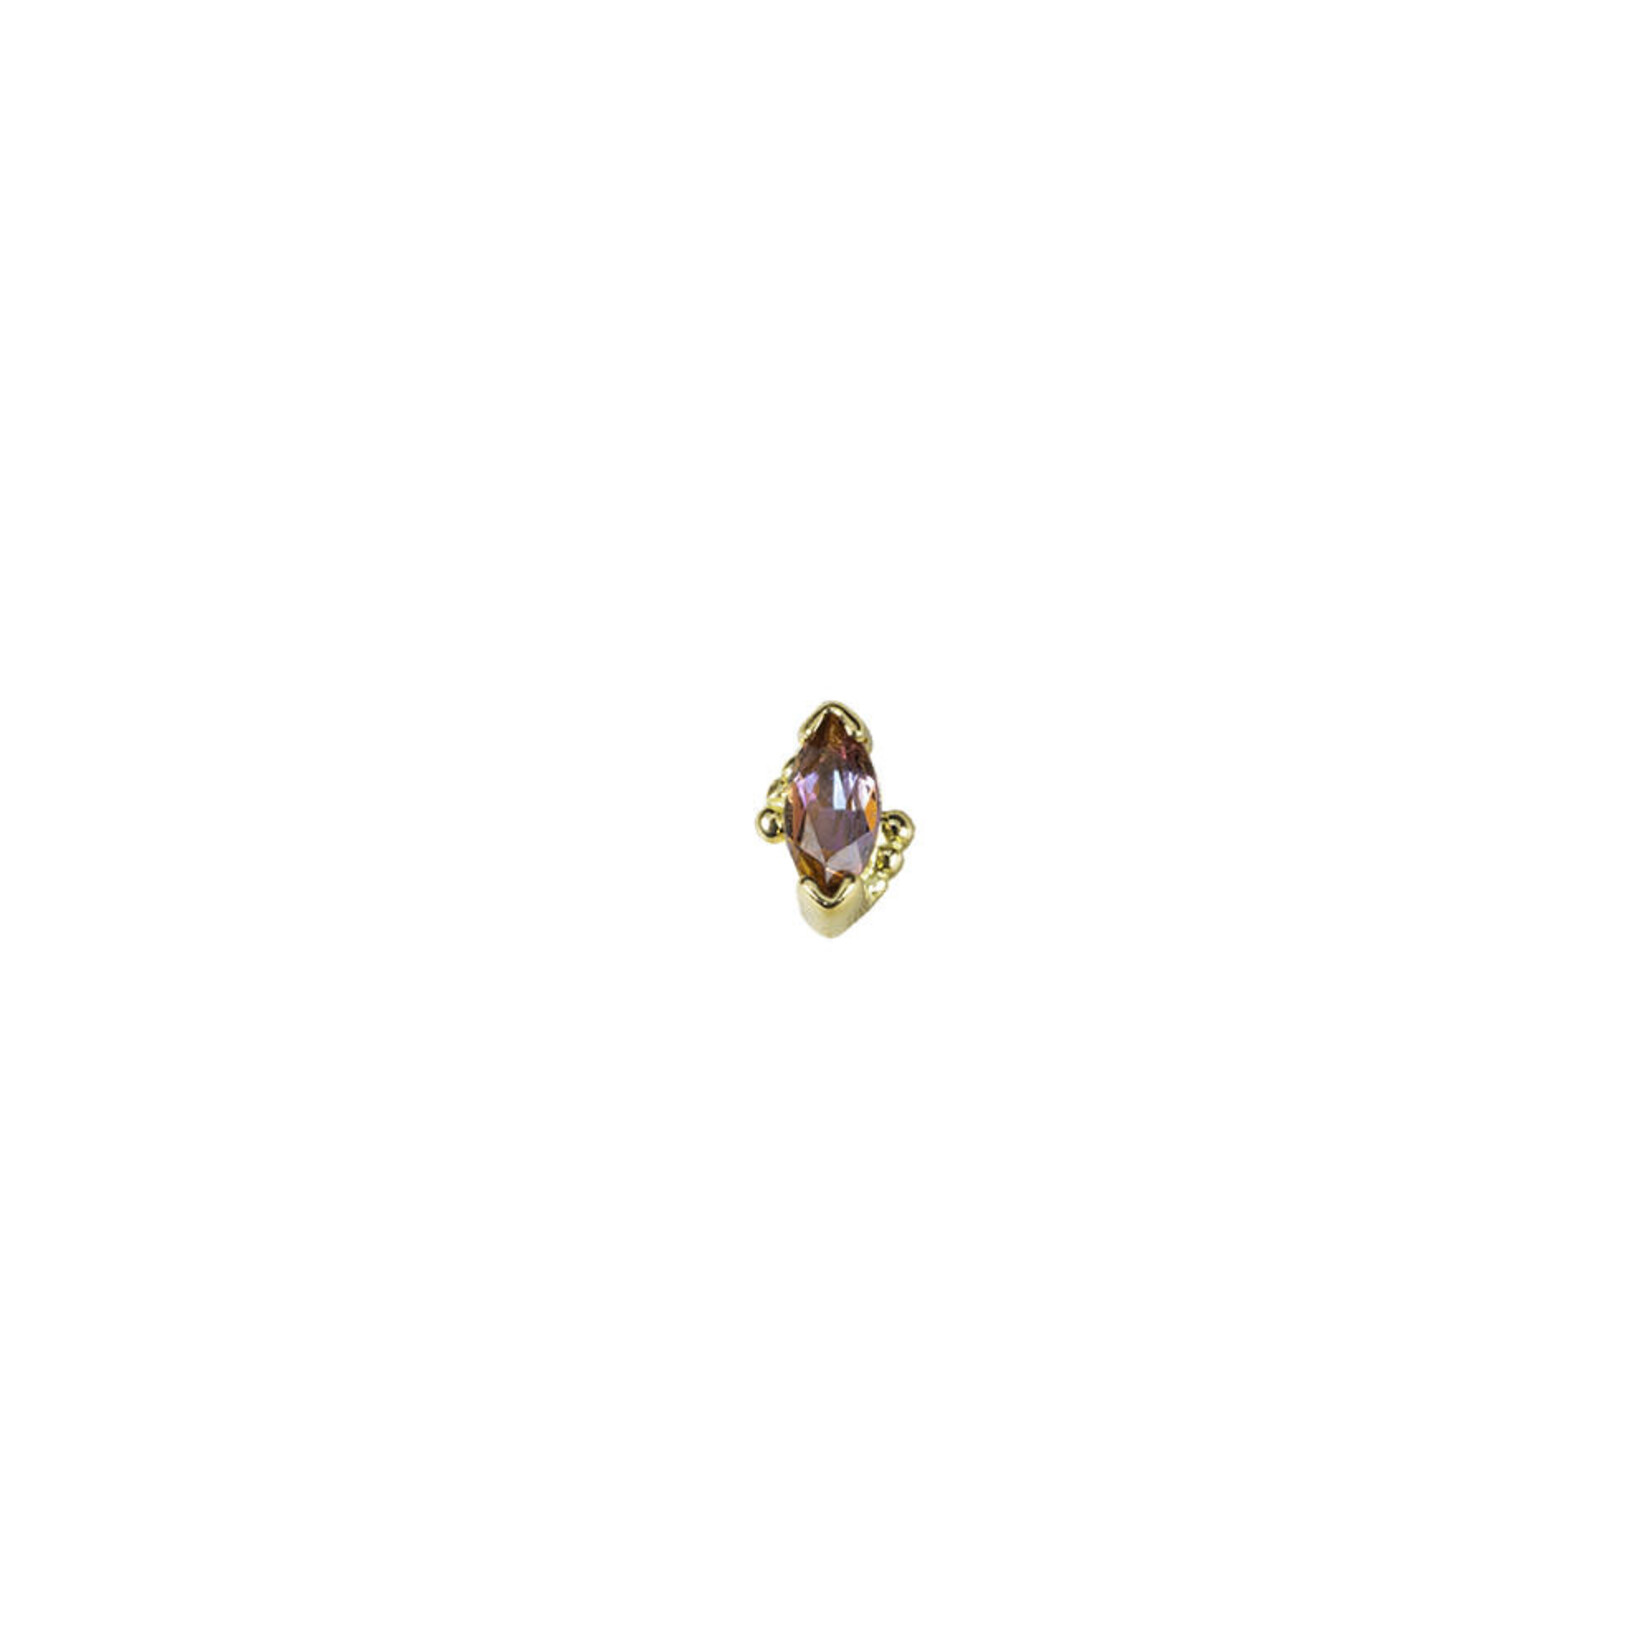 BVLA BVLA "Beaded Marquise" press-fit end with 4x2 Anastasia Topaz